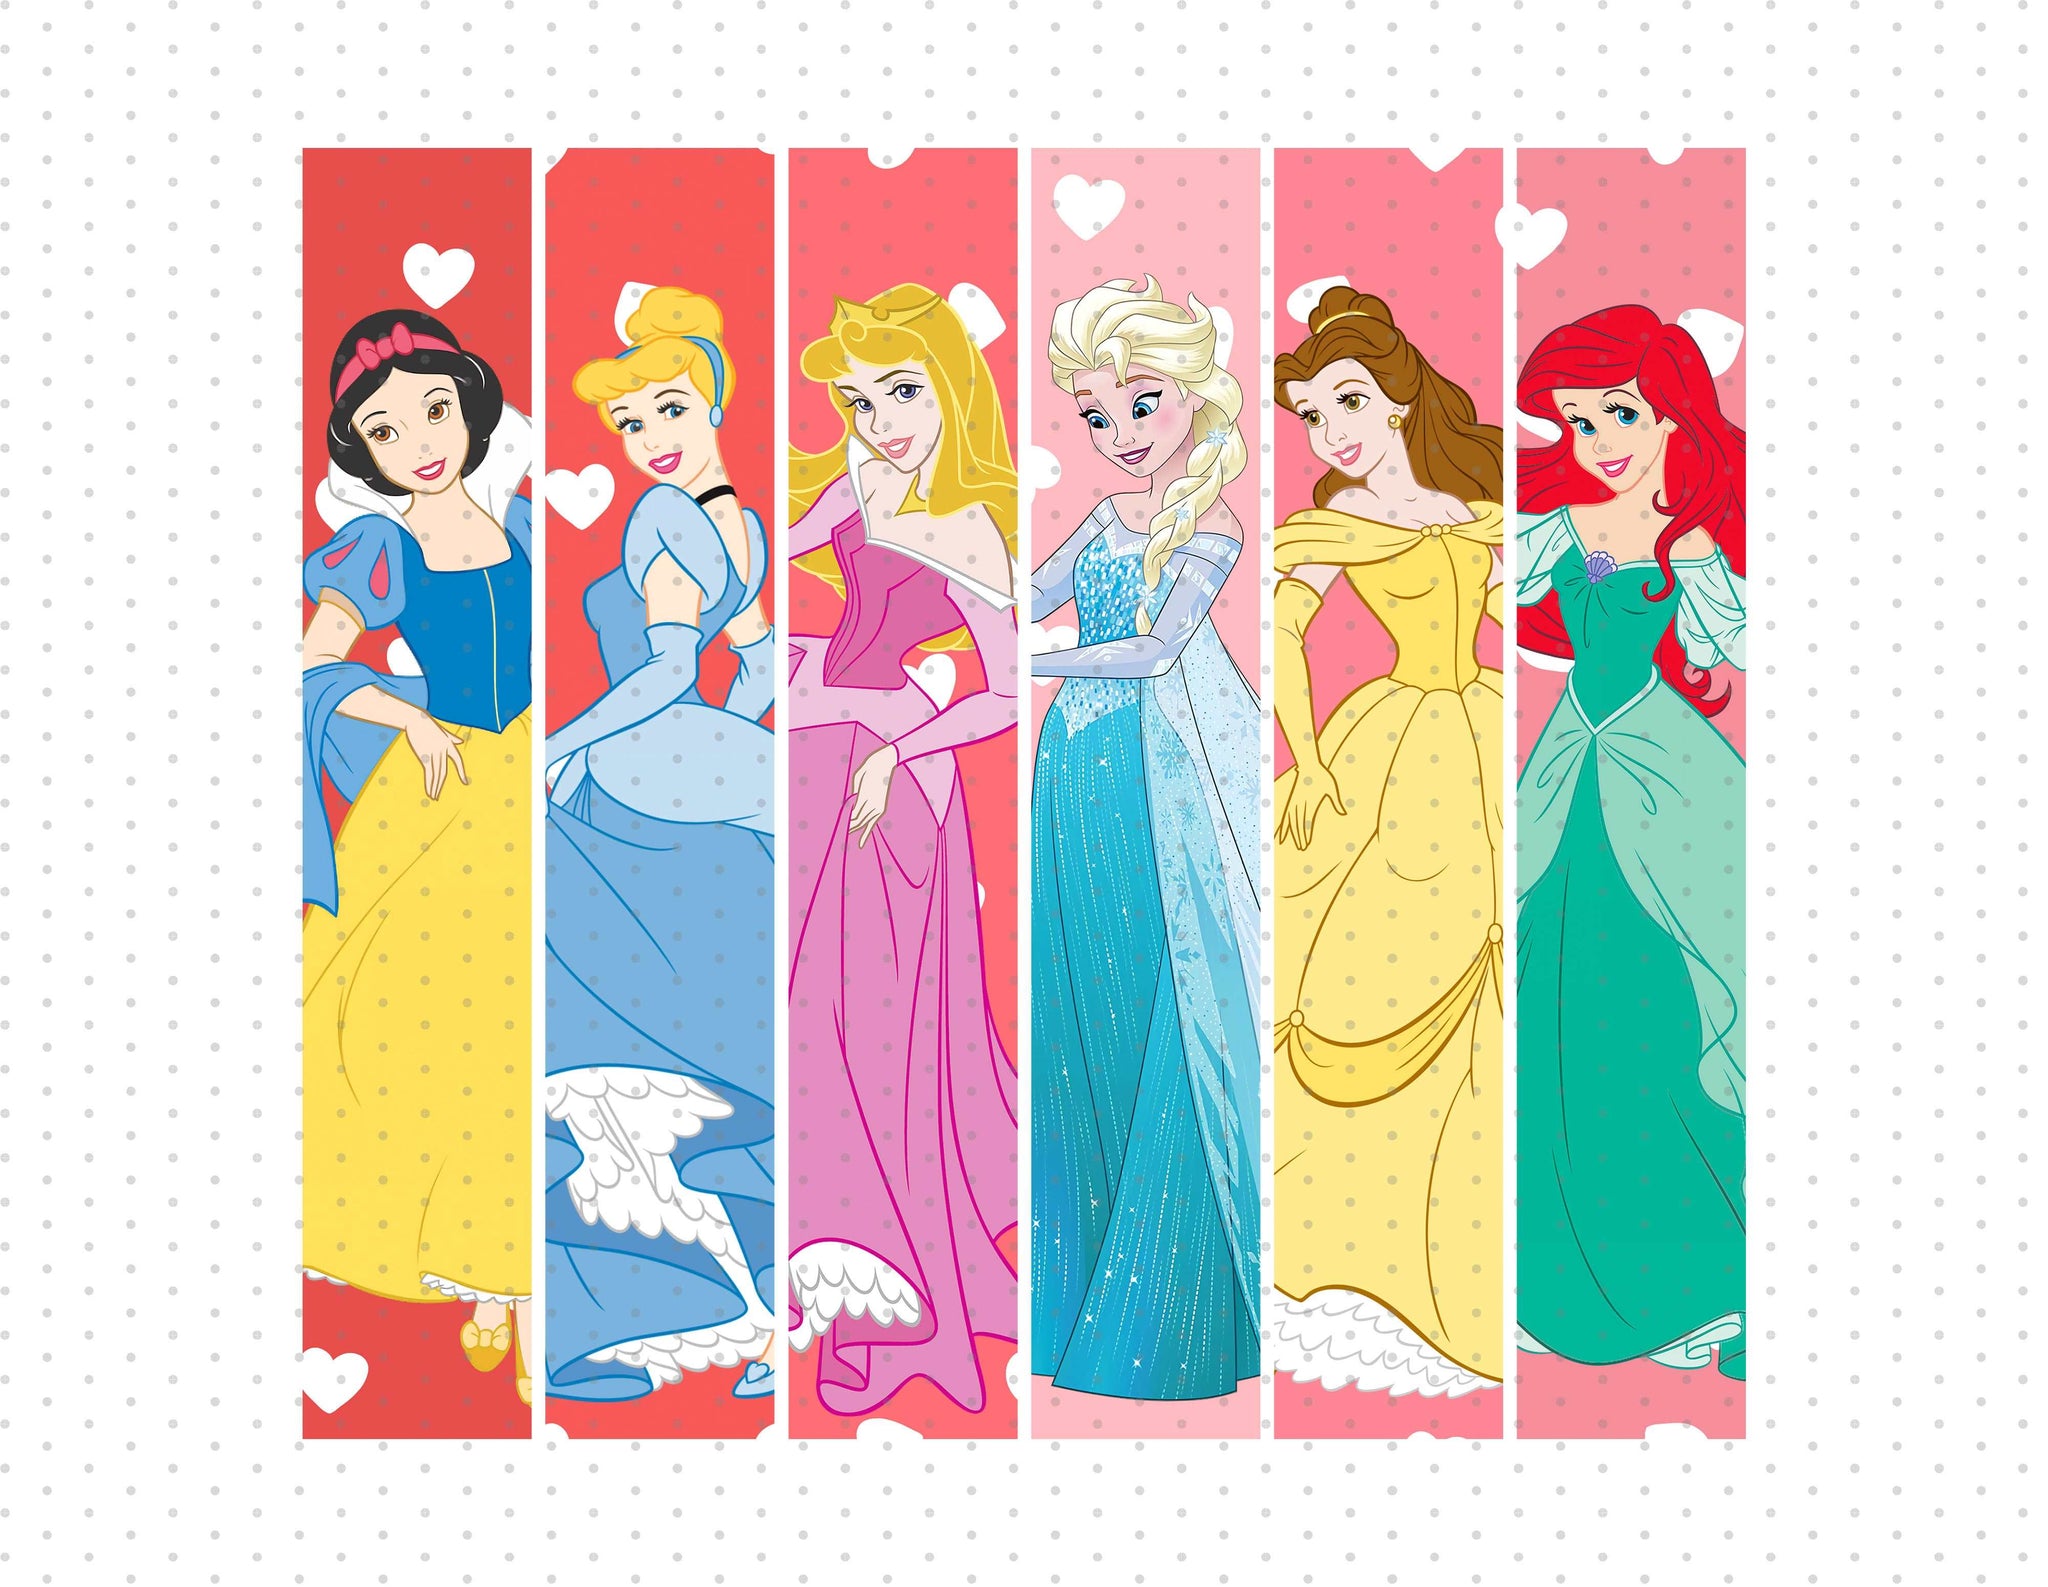 Disney Princess - Happy Valentine's Day Sublimation PNG - Instant Down